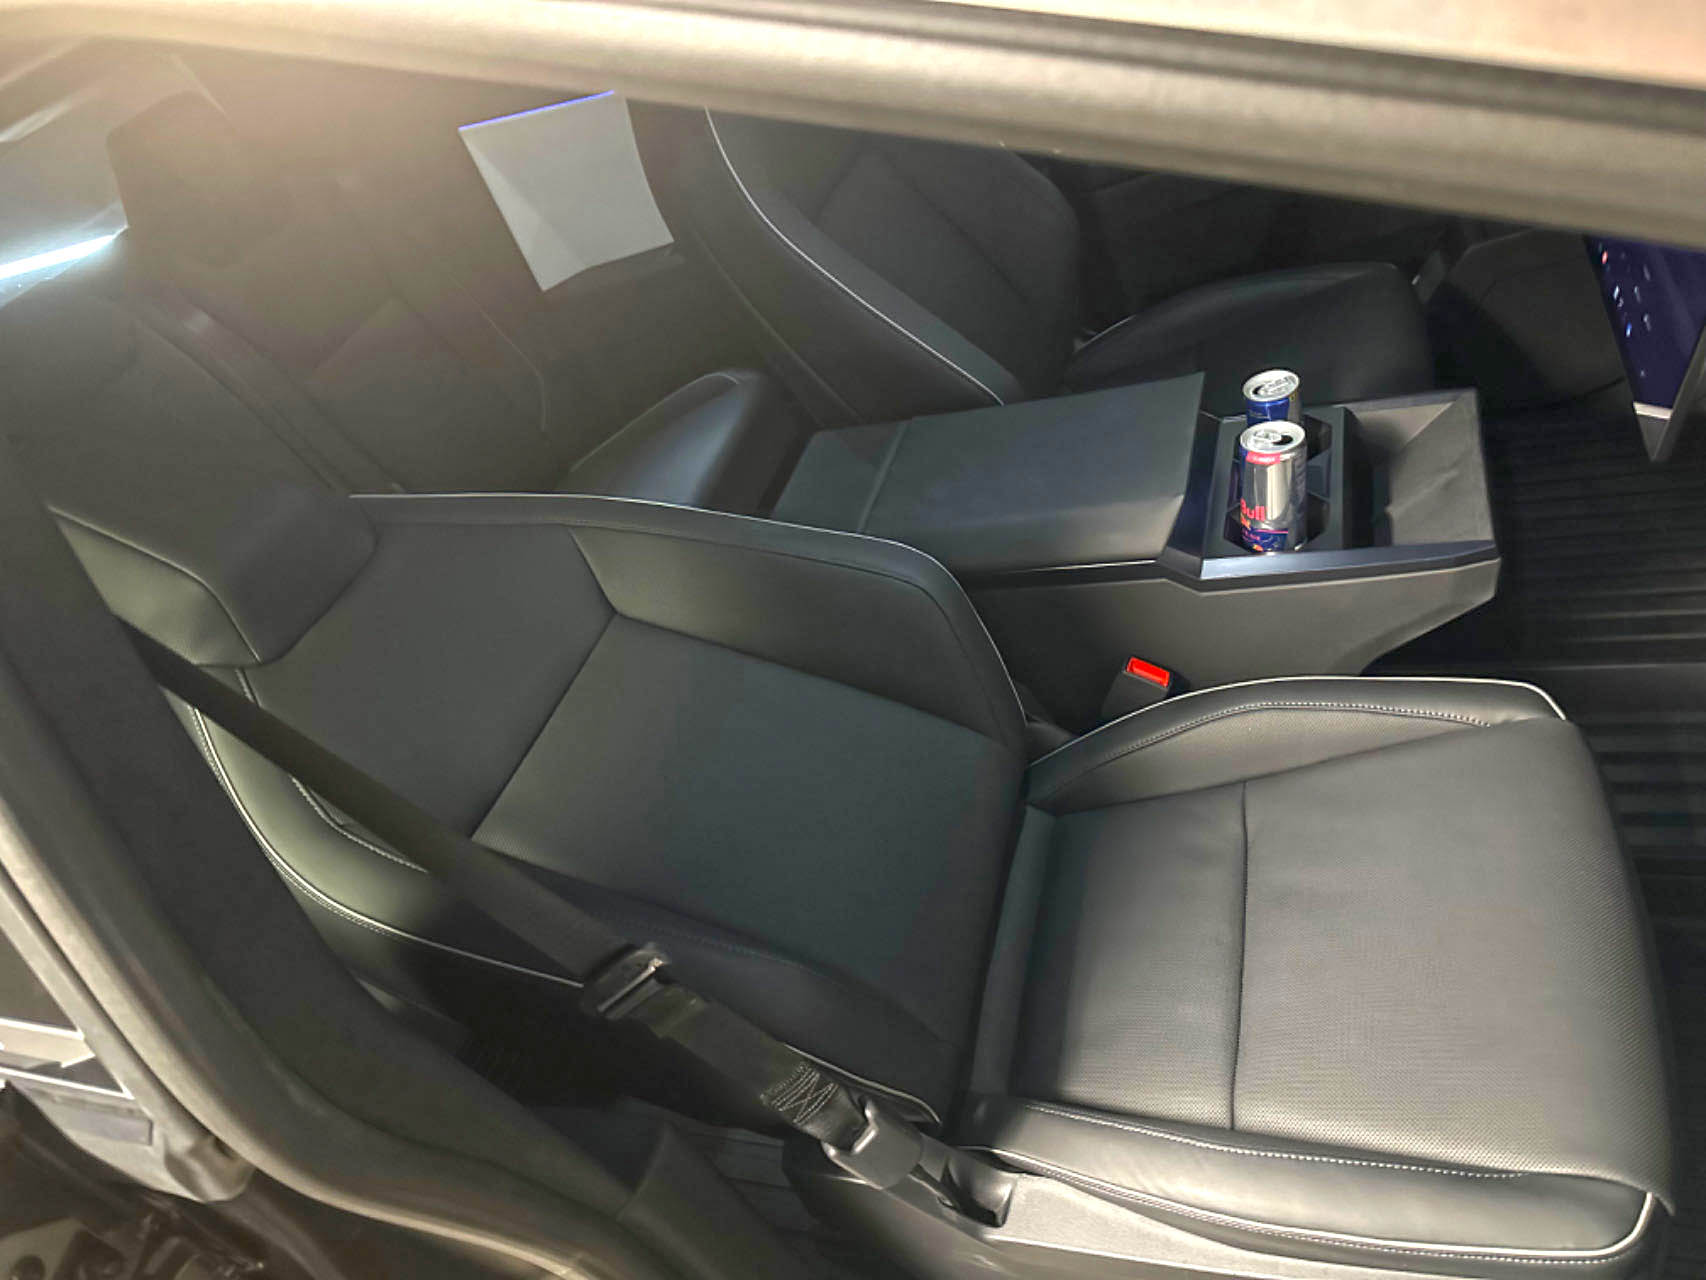 Tesla Cybertruck My Cybertruck is Delivered Today January 11!! (non-employee) 👍 First Impressions + Photos 📸 cybertruck front seats reclined flat